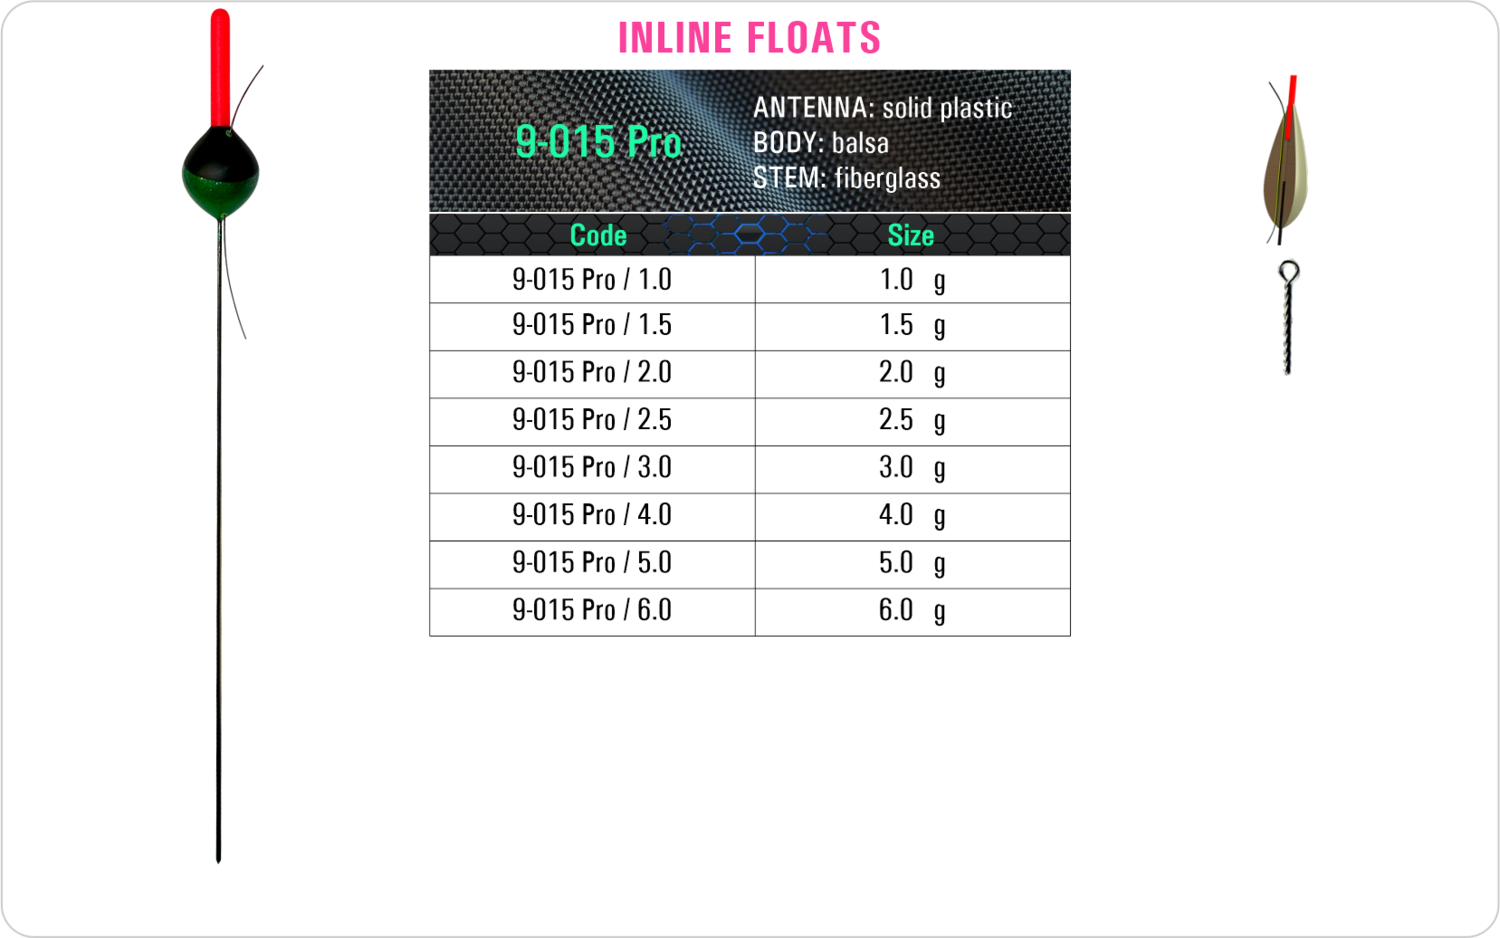 SF 9-015 Pro - Lake and river float model and table containing an additional information about this float with different codes, sizes, types of the body, the stem and the antenna of the float.